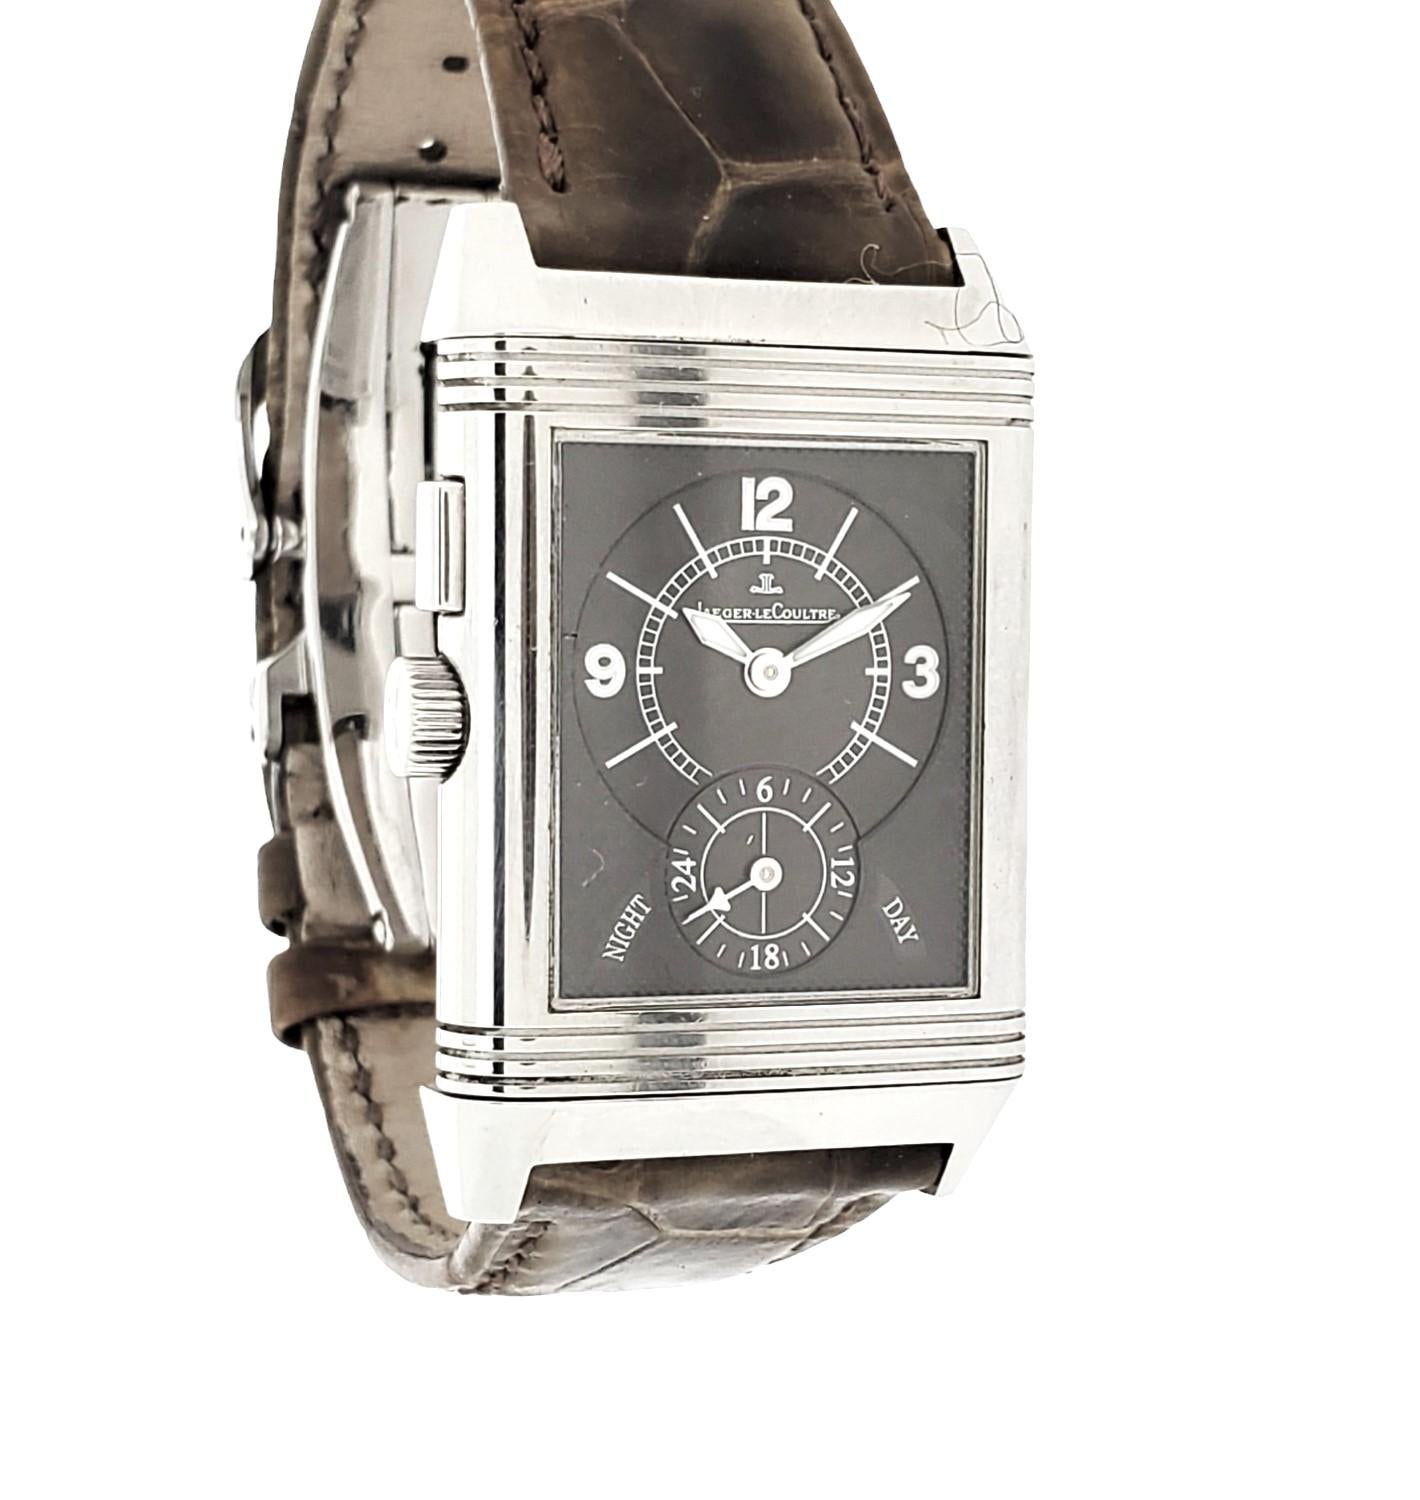 Jaeger LeCoultre Reverso Night & Day.  The watch comes with a Silver and slate Dial.  It also has the adjustment for 2 time zones.
The case is made of Stainless Steel & Alligator Strap w. Deployant Buckle
 42mm x 26mm Case Size
Condition: